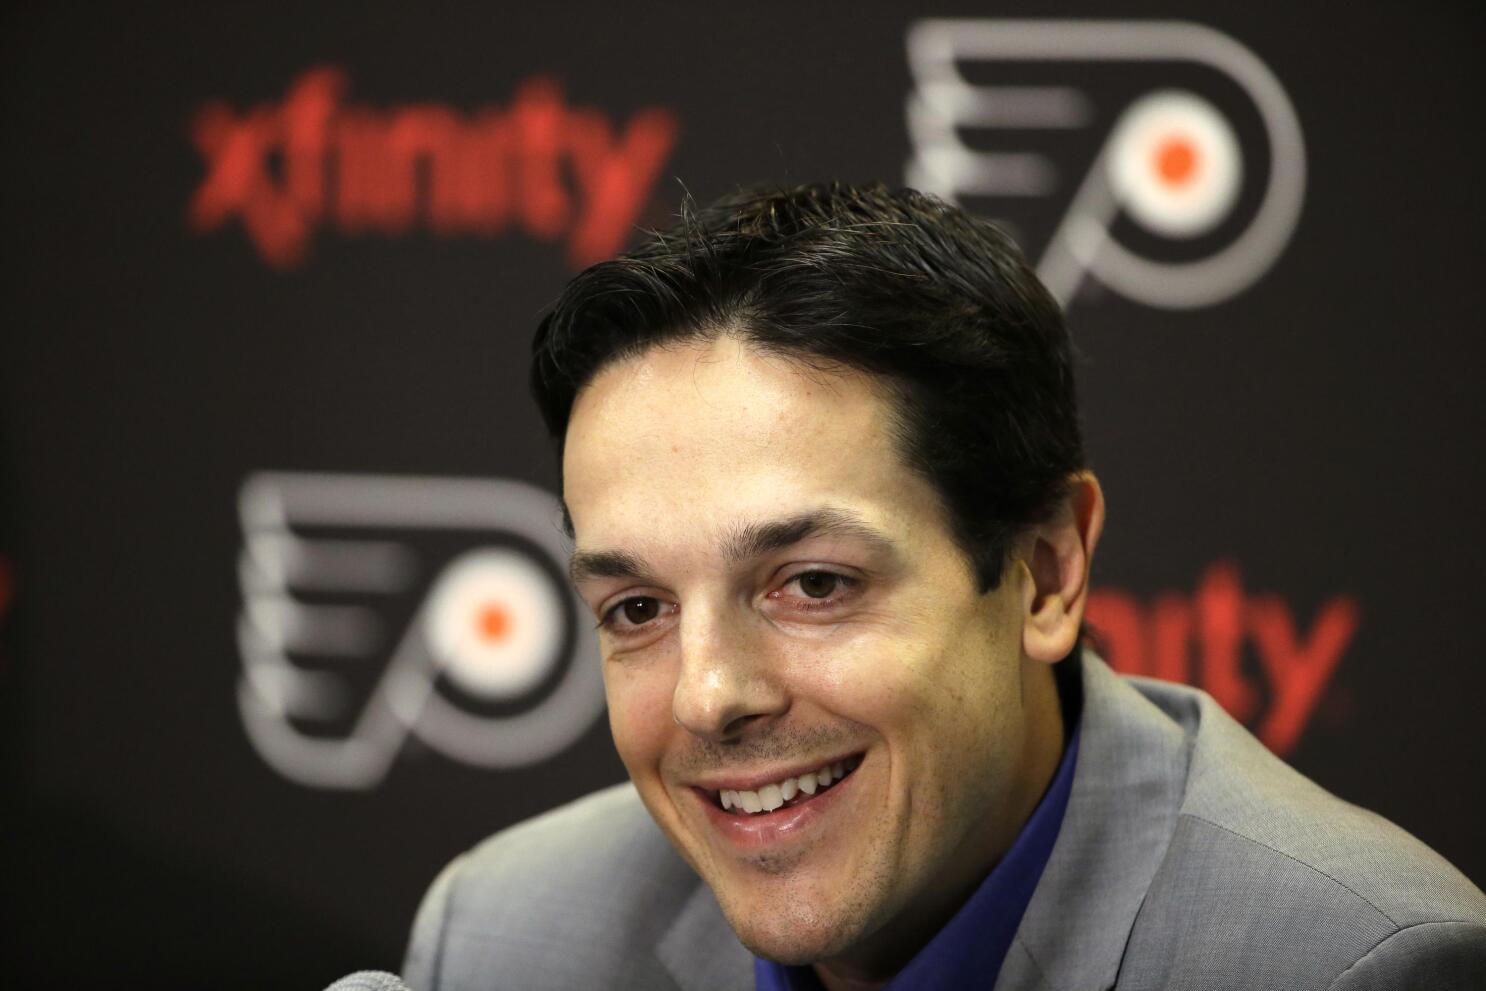 Danny Brière hopes to lead Flyers through 'rebuild', National Sports